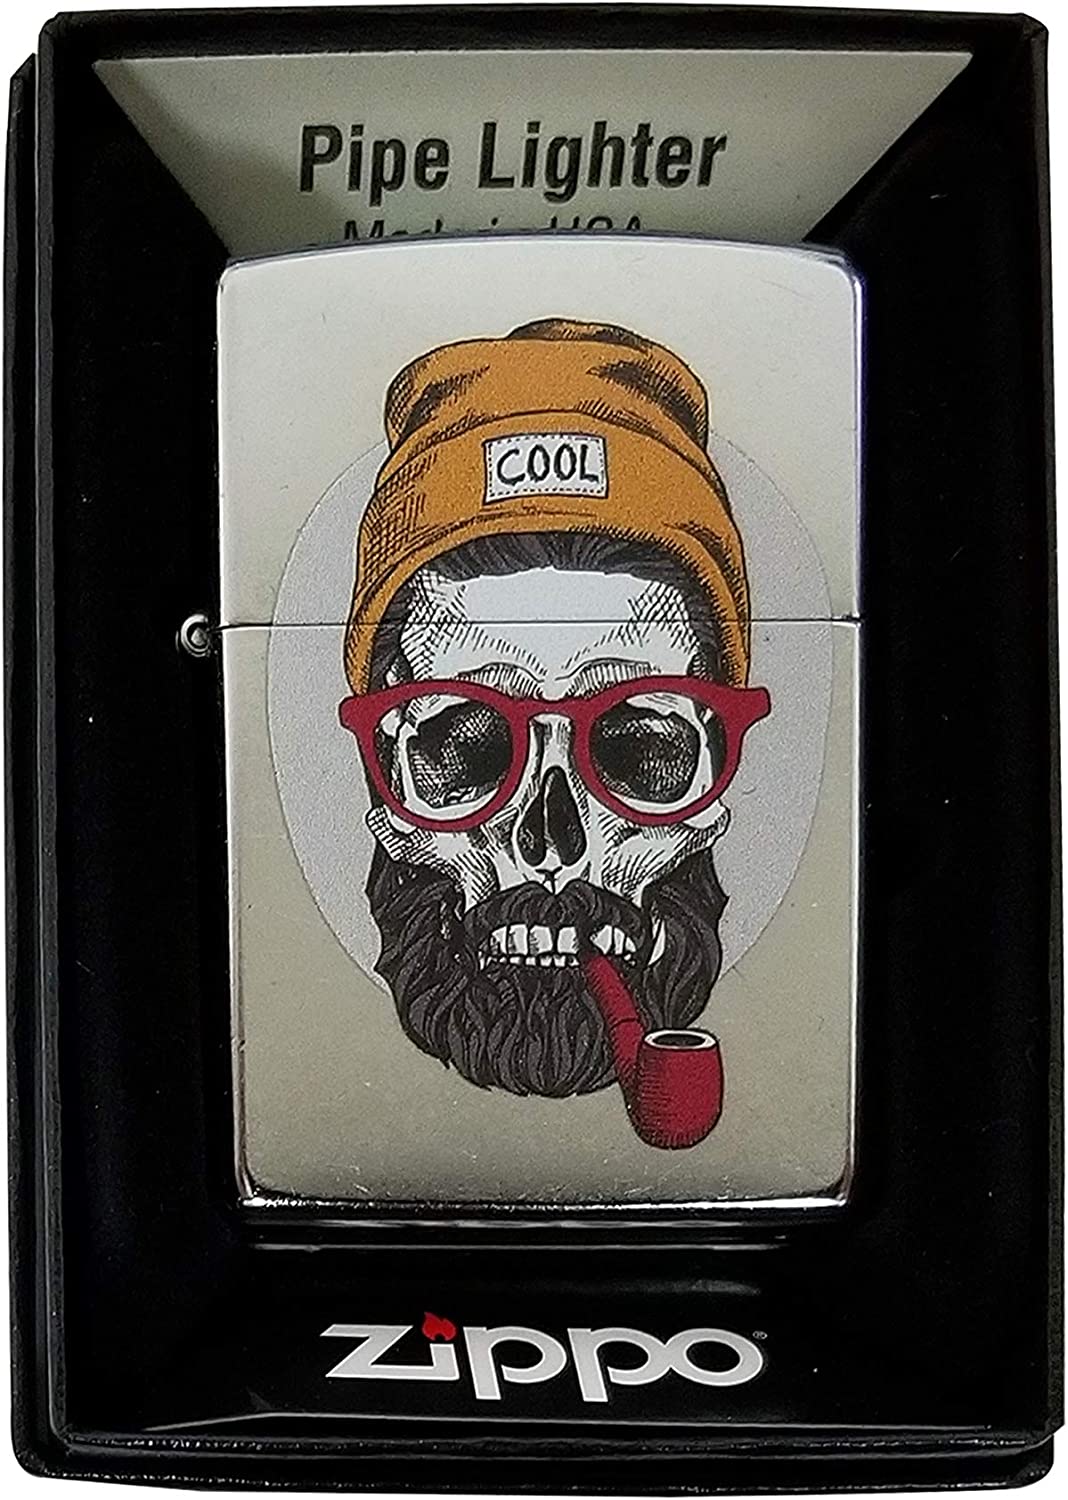 Hipster Skull with Beanie and Beard Smoking a Pipe - Street Chrome Zippo Lighter